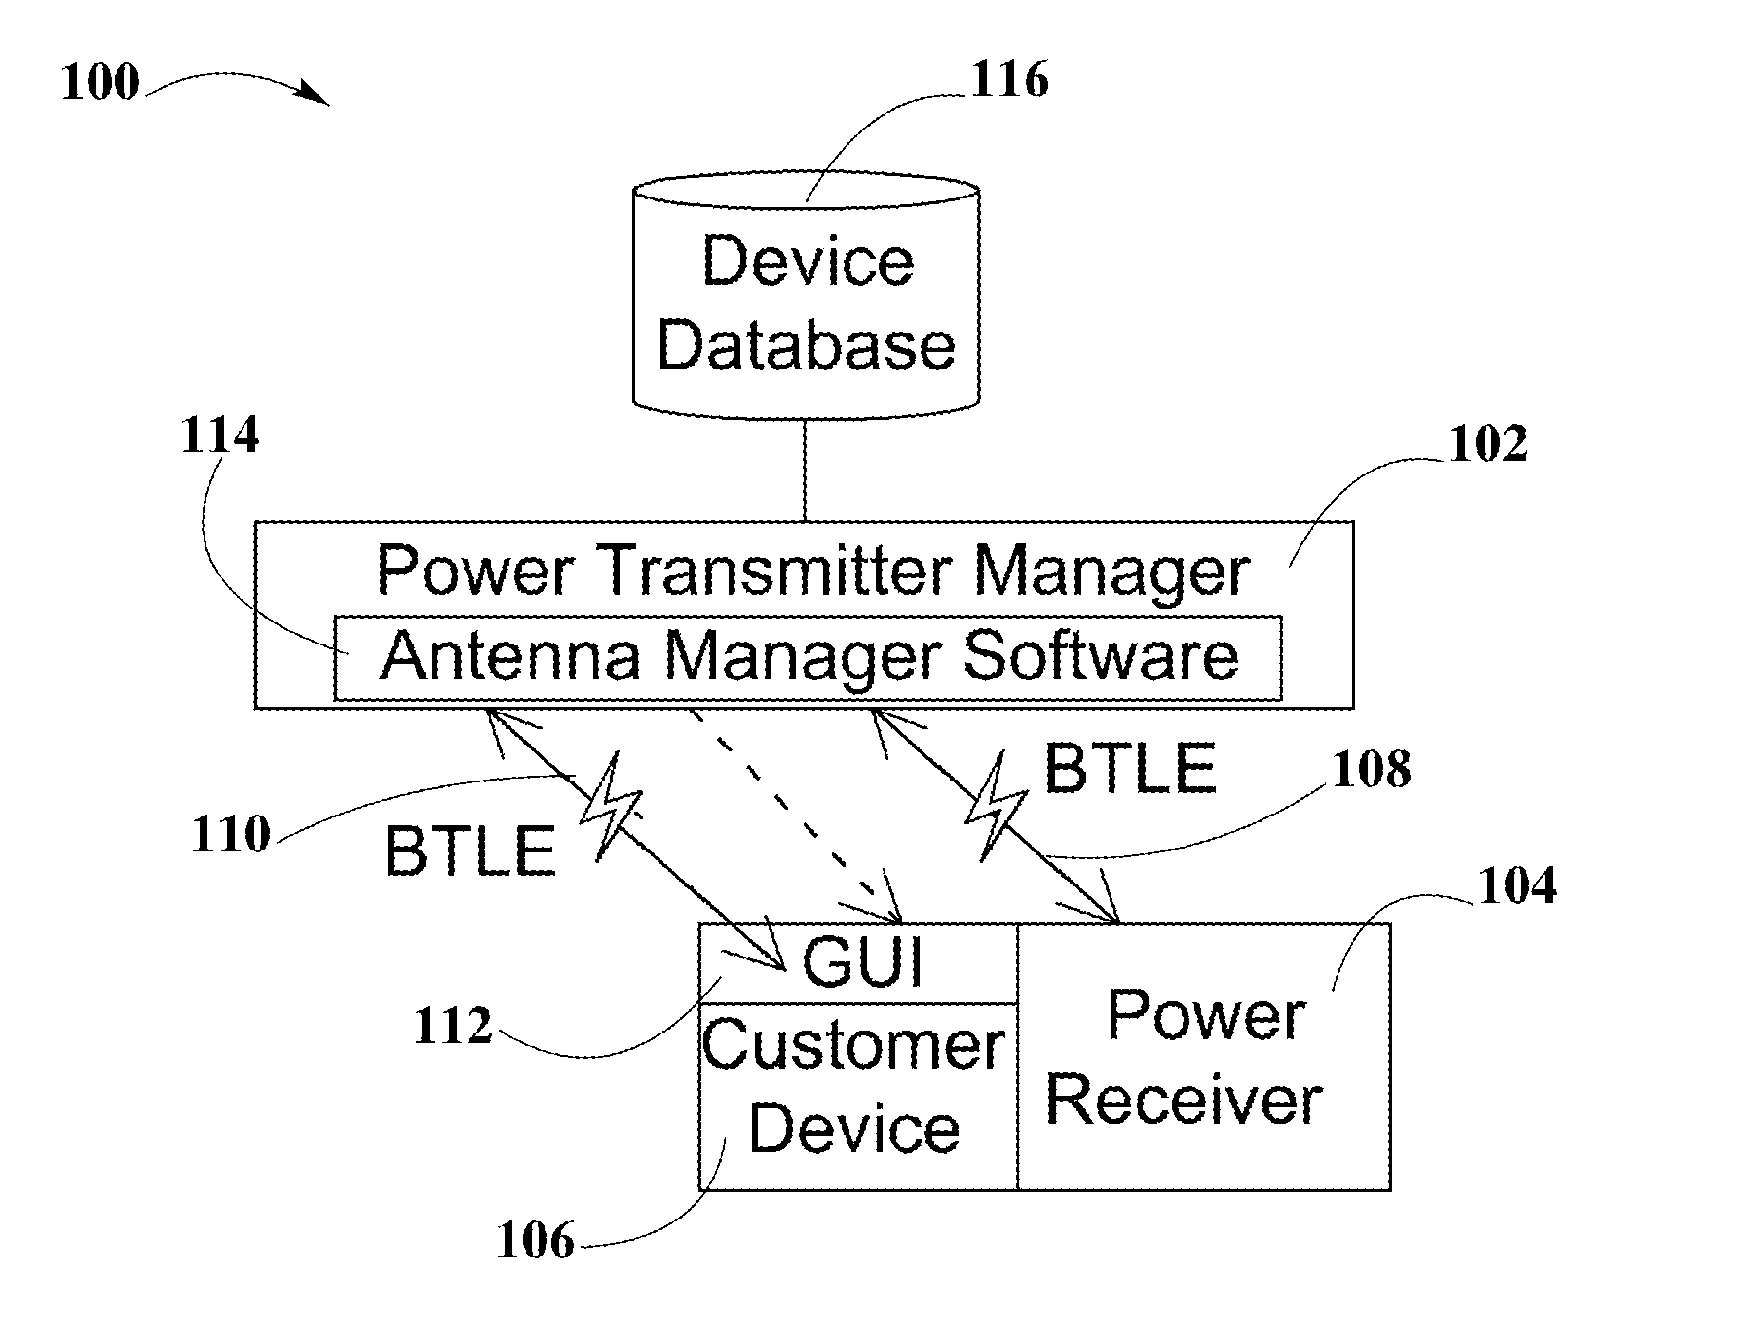 System and Method for a Self-system Analysis in a Wireless Power Transmission Network